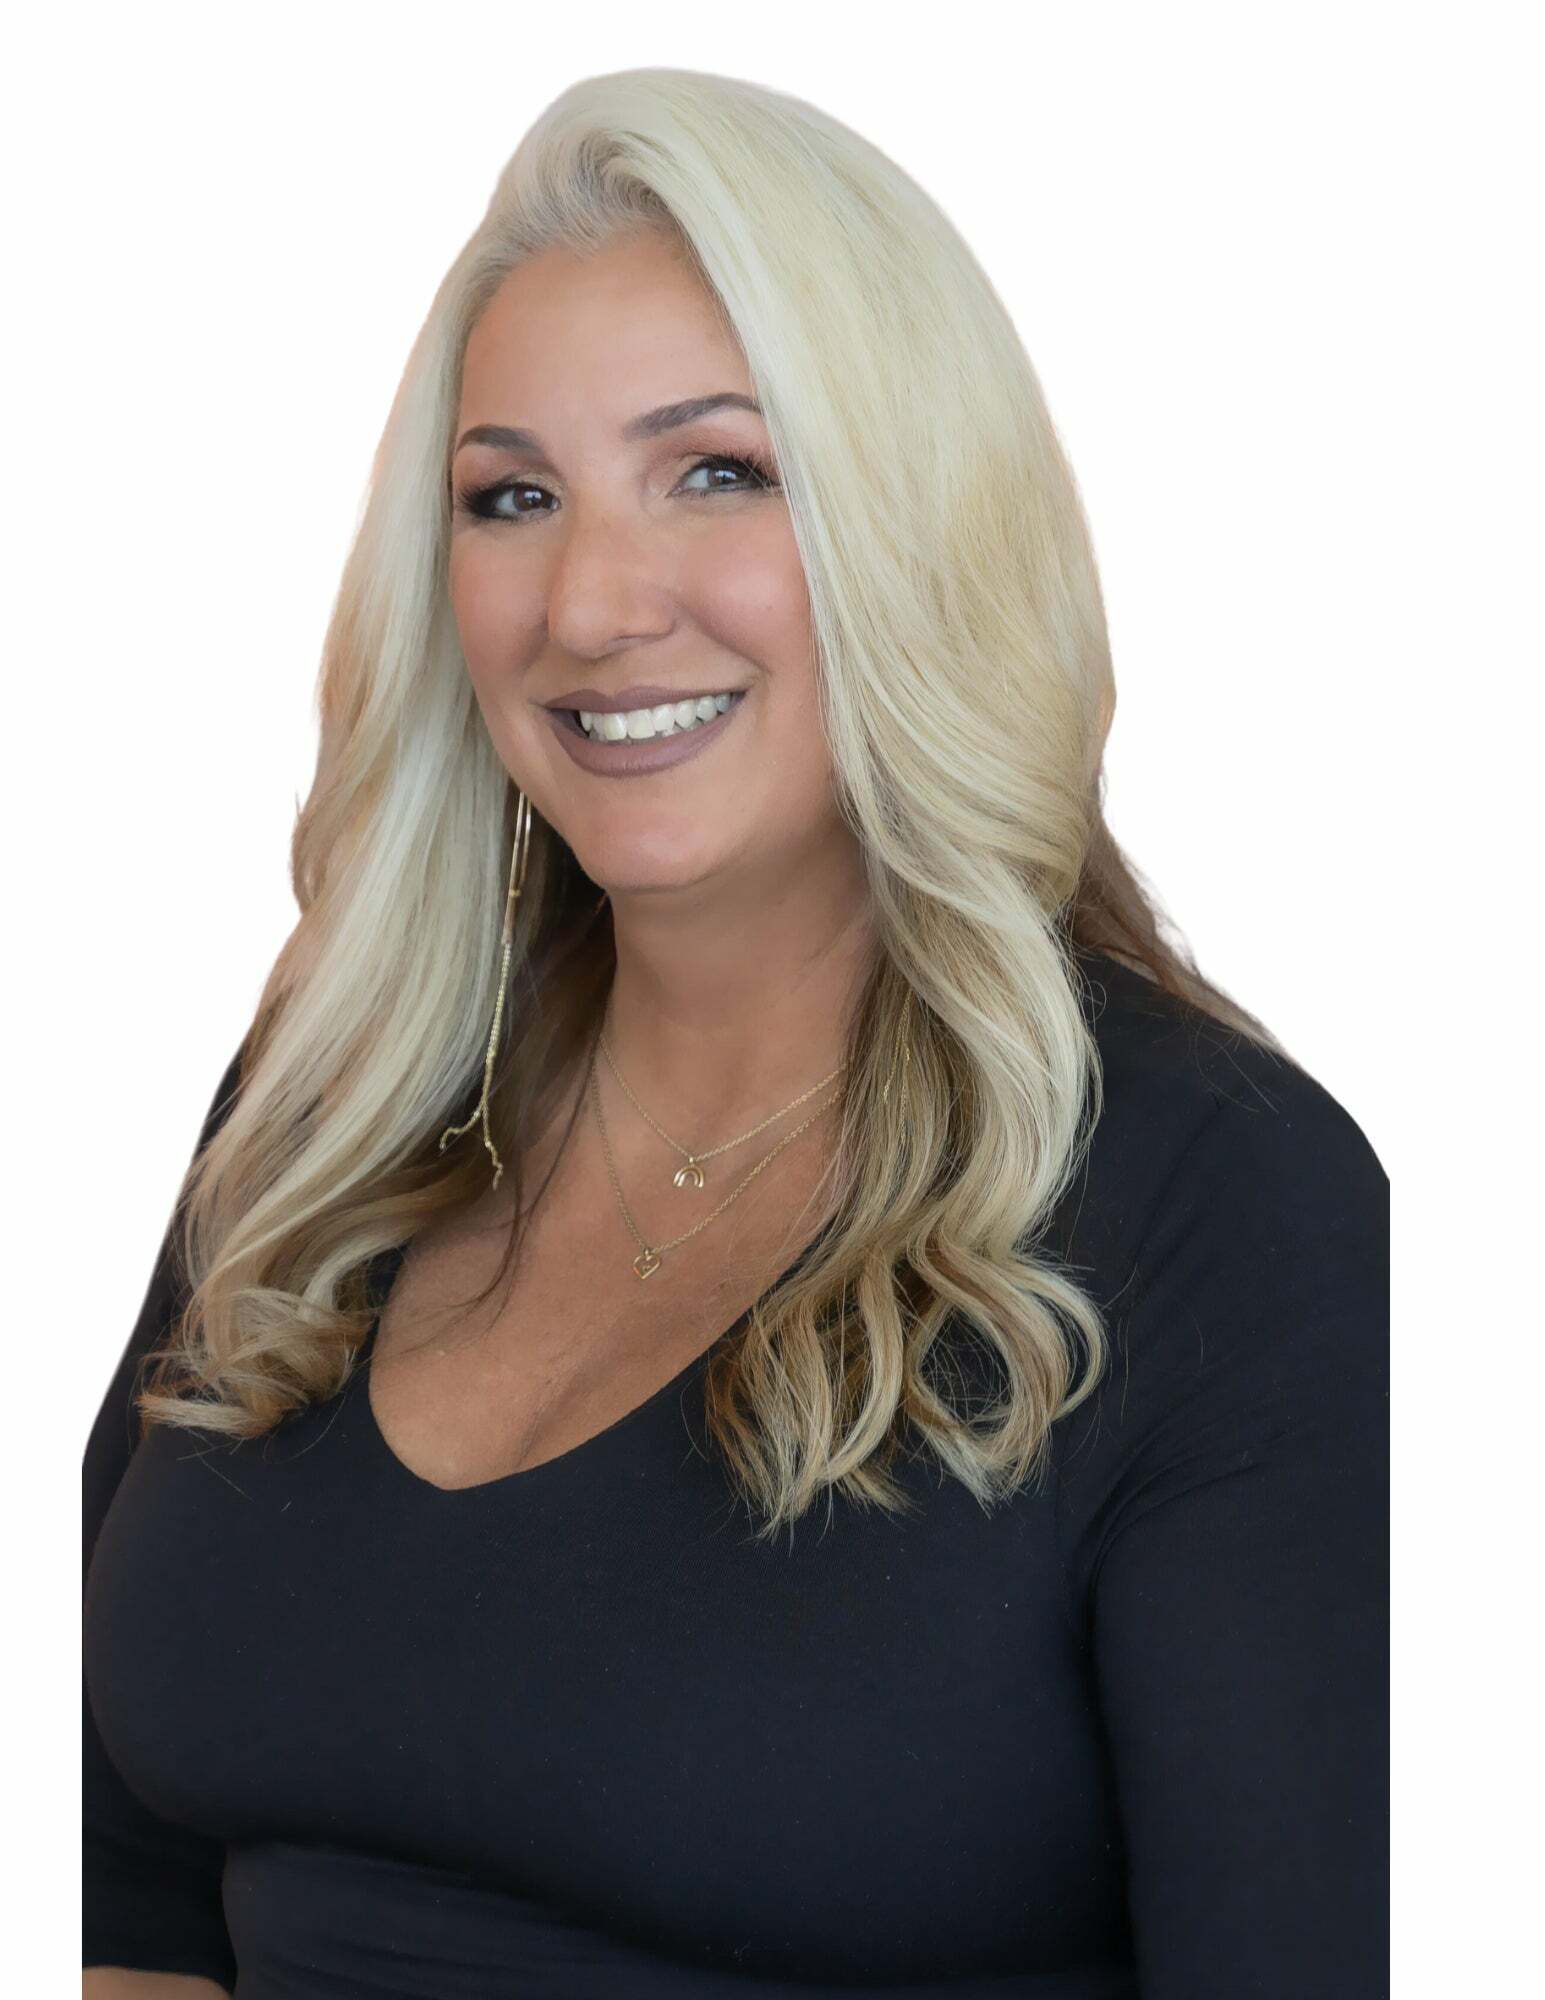 Kimberly Bland, Real Estate Salesperson in Fort Lauderdale, Florida 1st